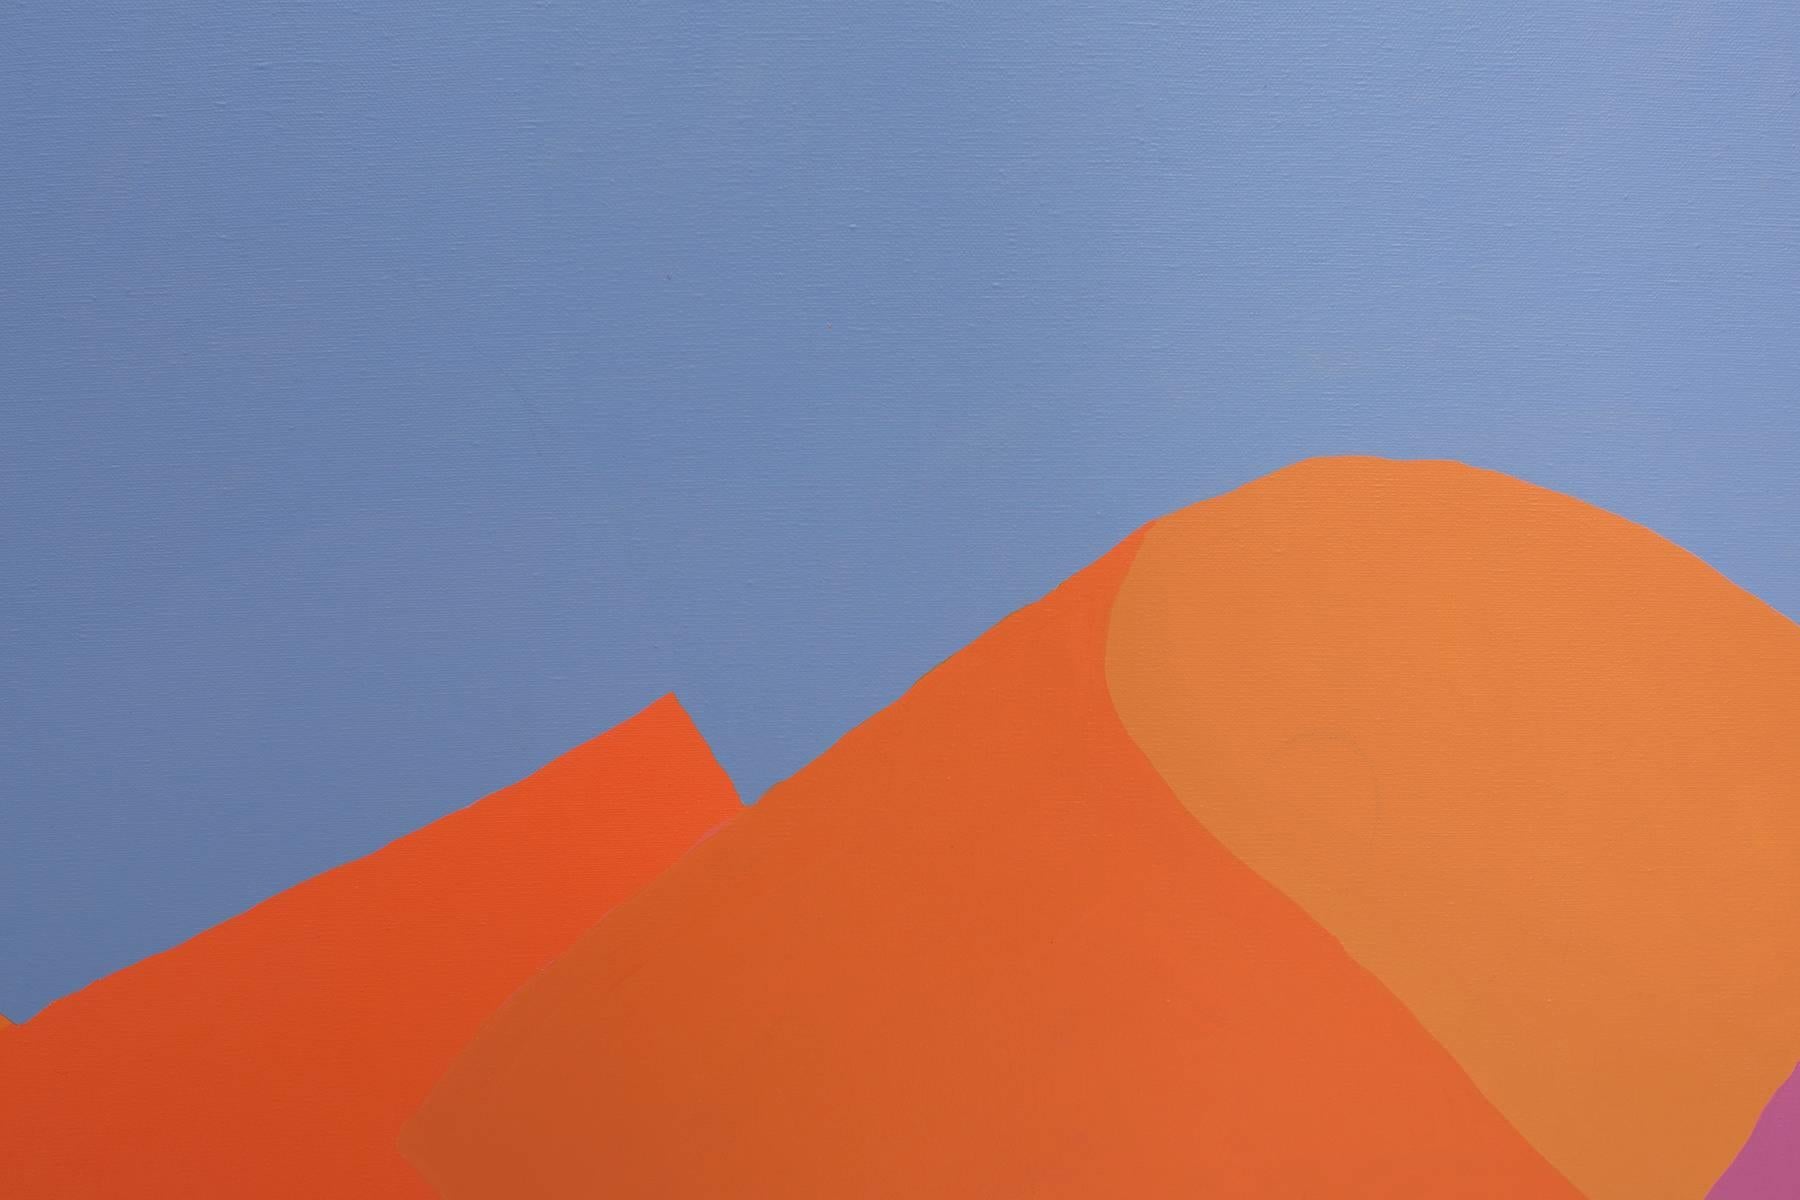 Jackie Carson hard edge acrylic painting, circa late 1970s. This example of vibrant candy color hues is a wonderful abstract representation of the dessert sky and glow of the mountains typically seen in the southwest. 
Please see Red's other